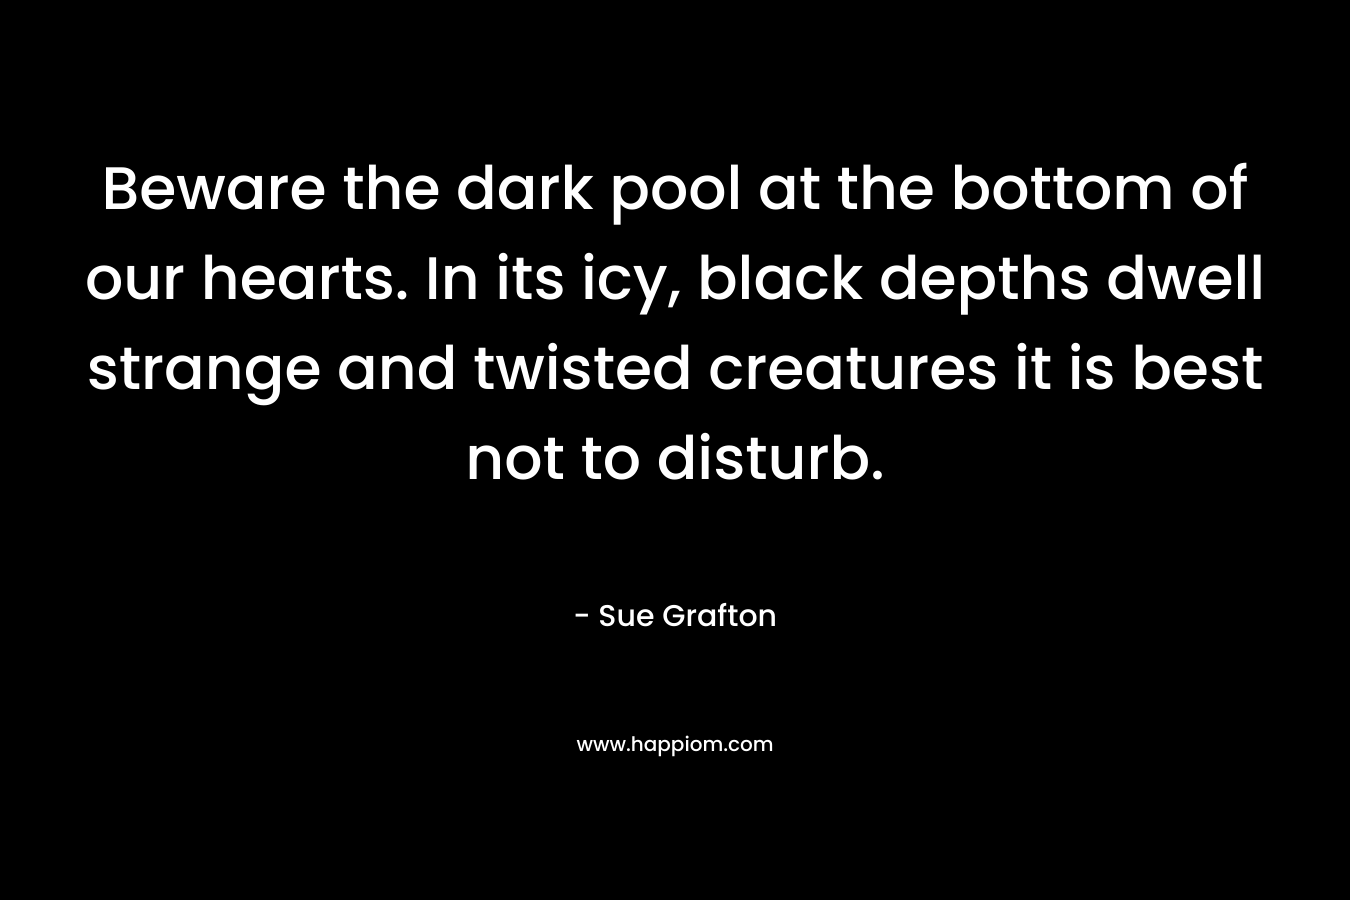 Beware the dark pool at the bottom of our hearts. In its icy, black depths dwell strange and twisted creatures it is best not to disturb. – Sue Grafton